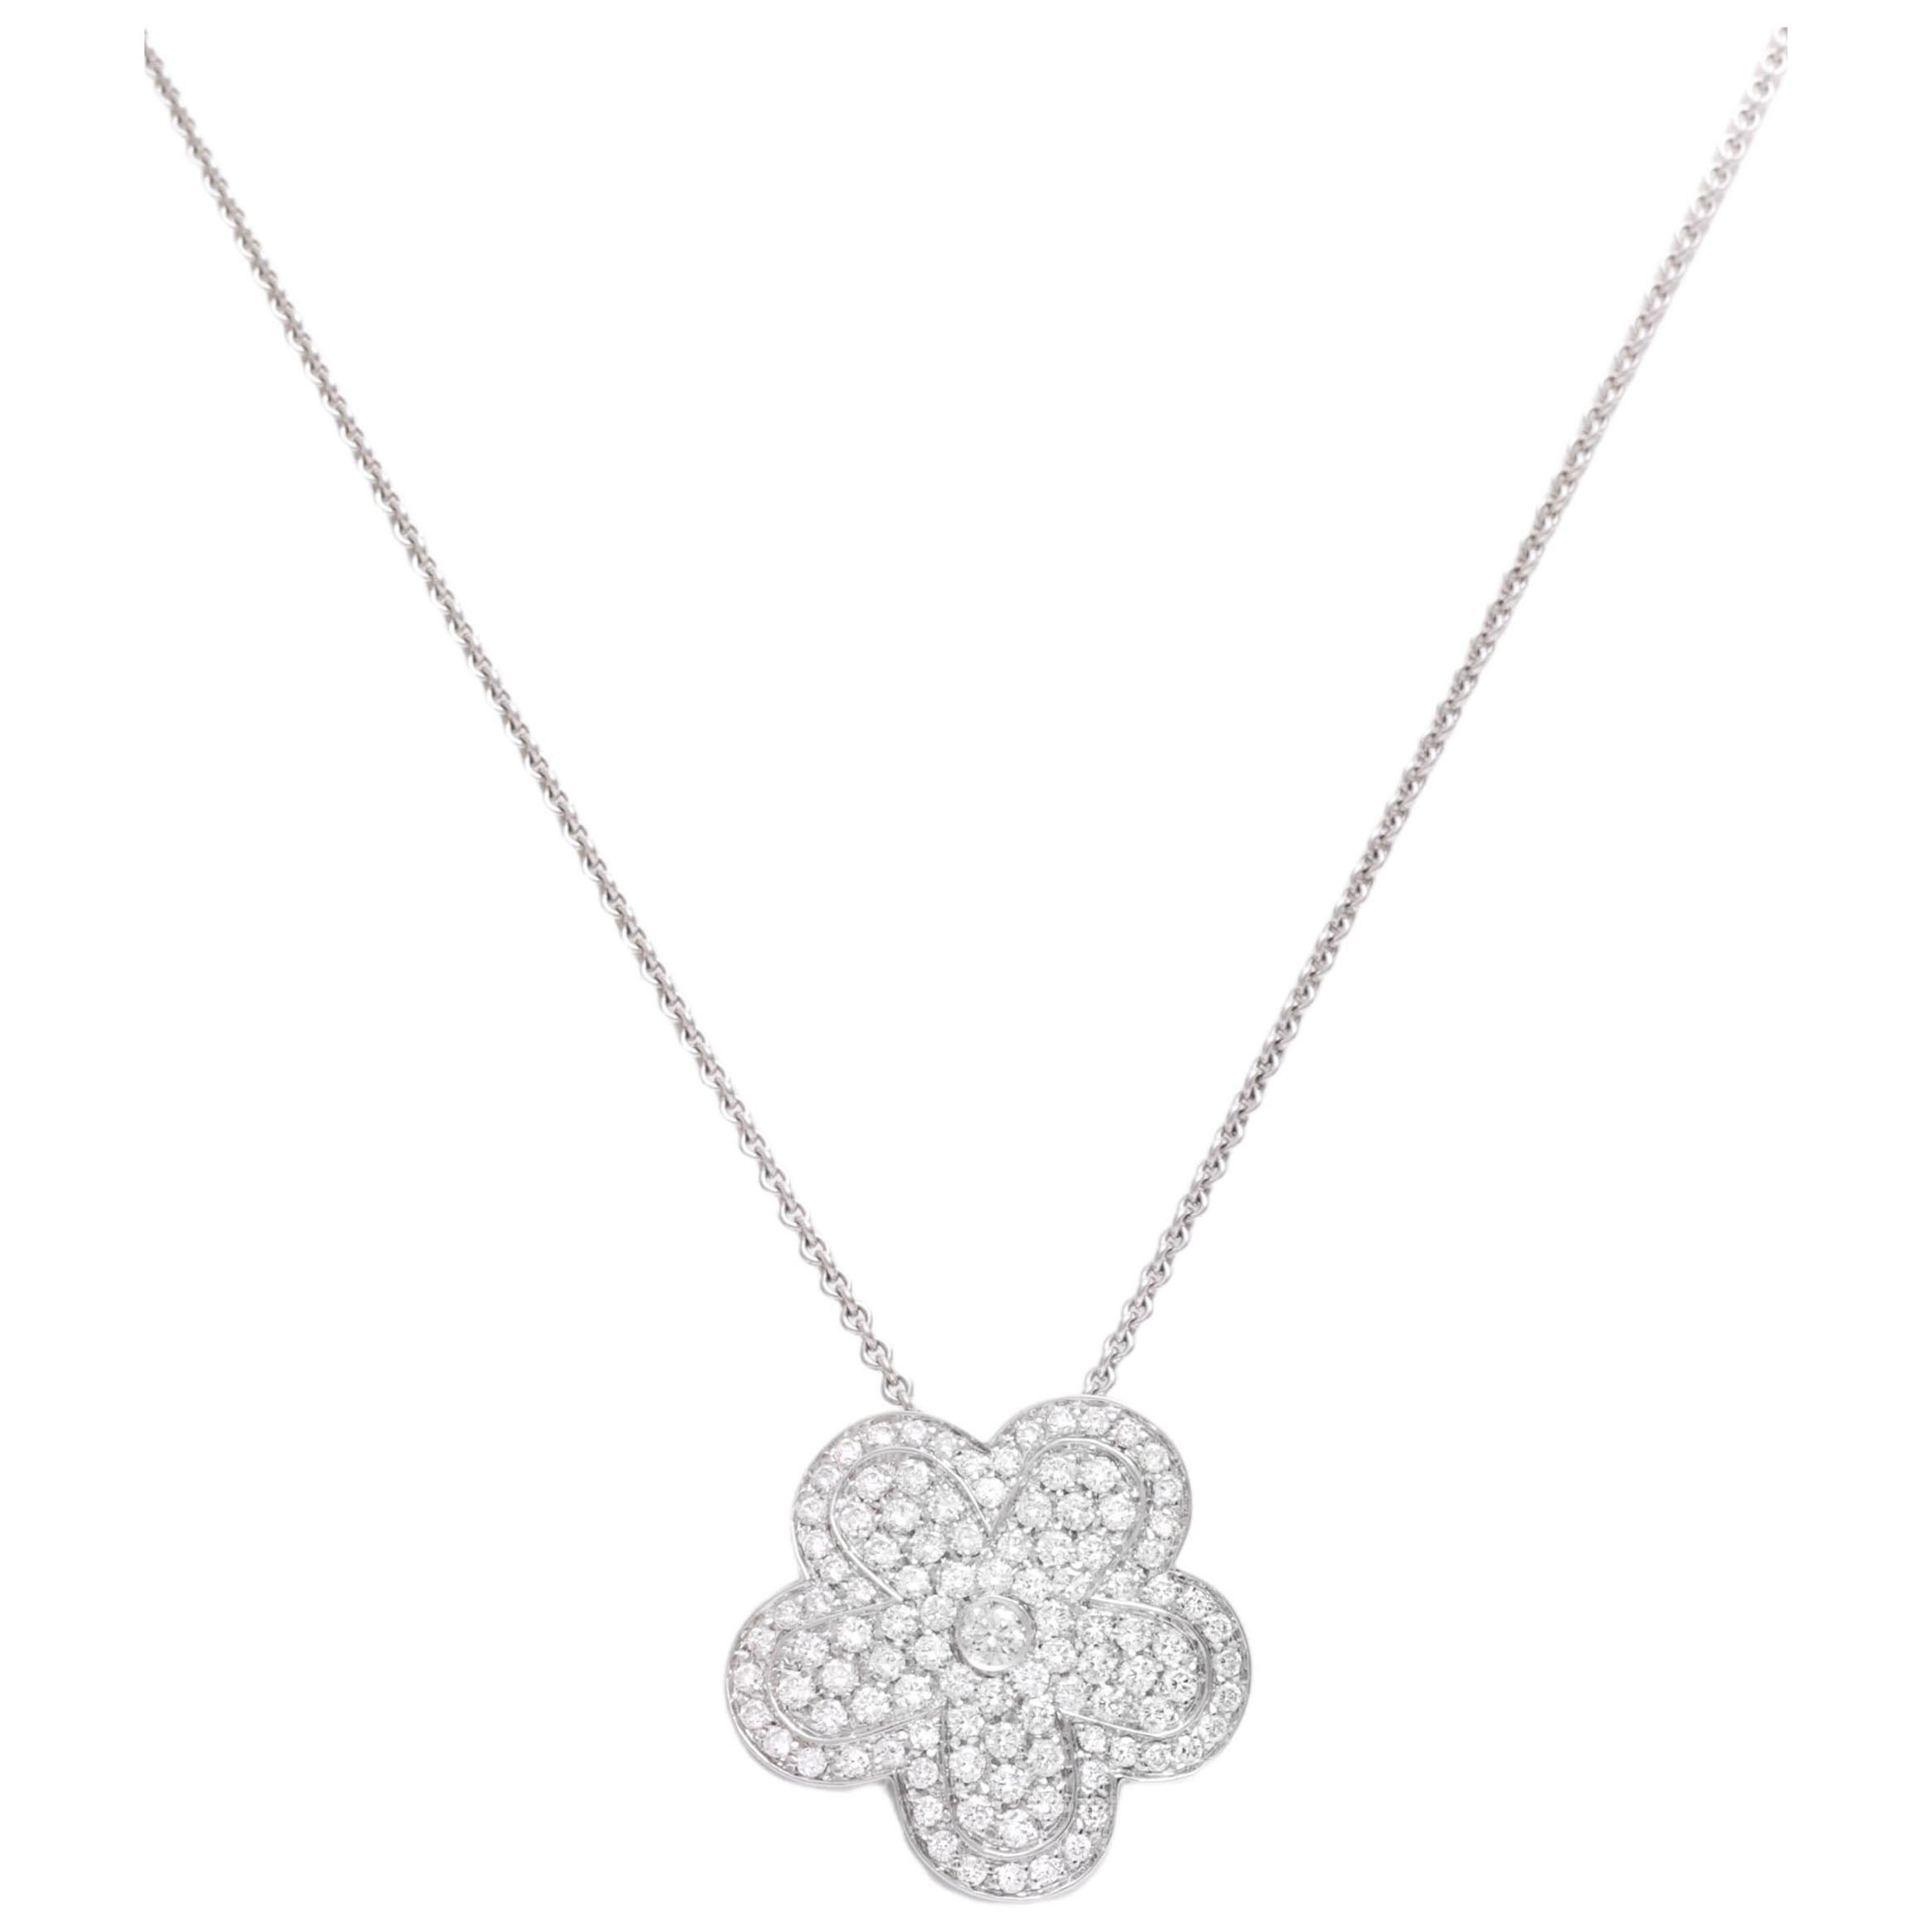 18 kt. White Gold Flower Pendant / Necklace With 1.18 ct. Diamonds